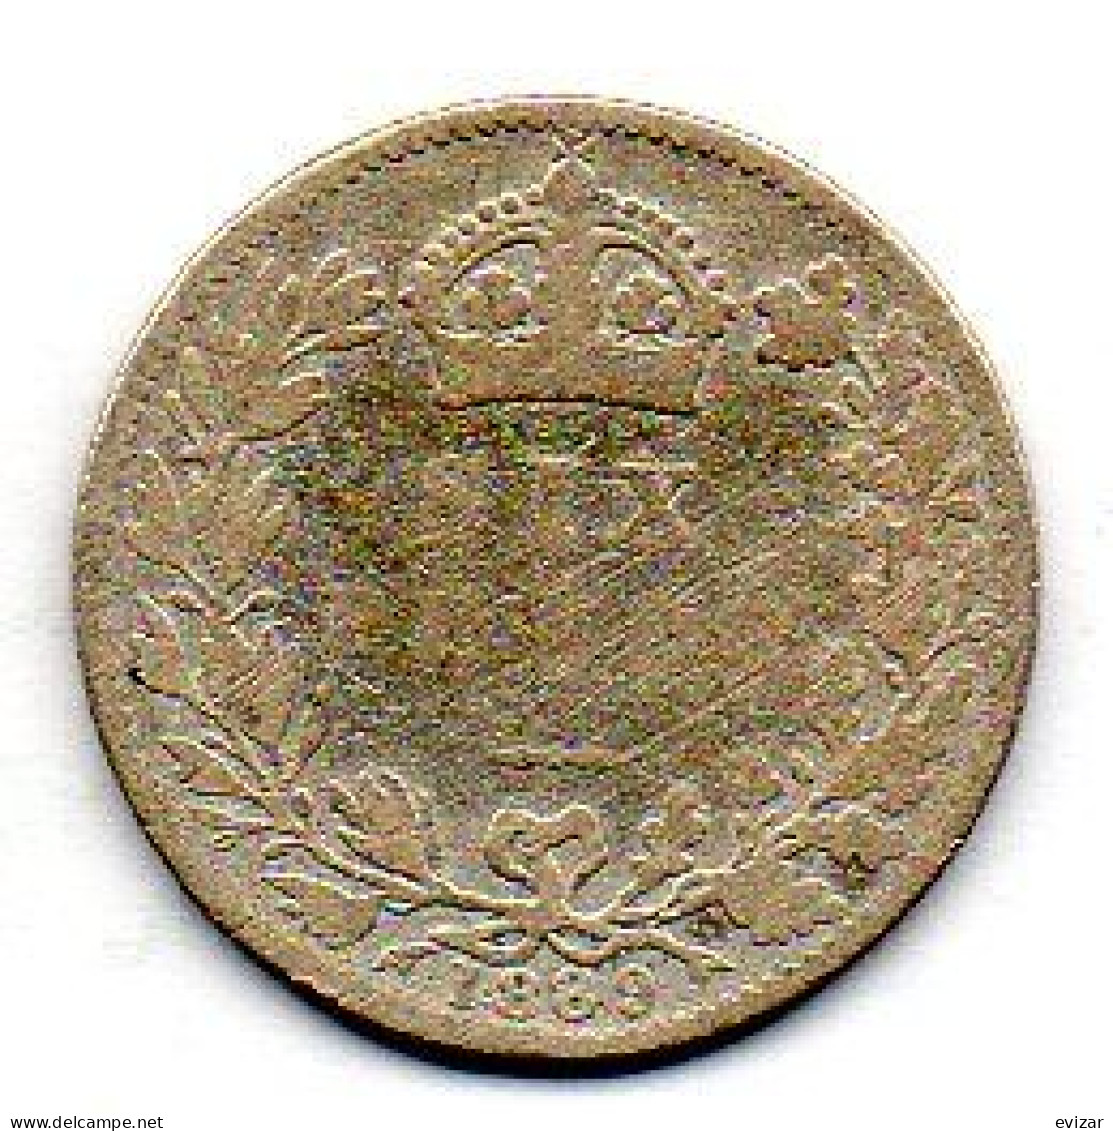 GREAT BRITAIN - 6 Pence, Silver, Year 1889, KM # 760 - H. 6 Pence